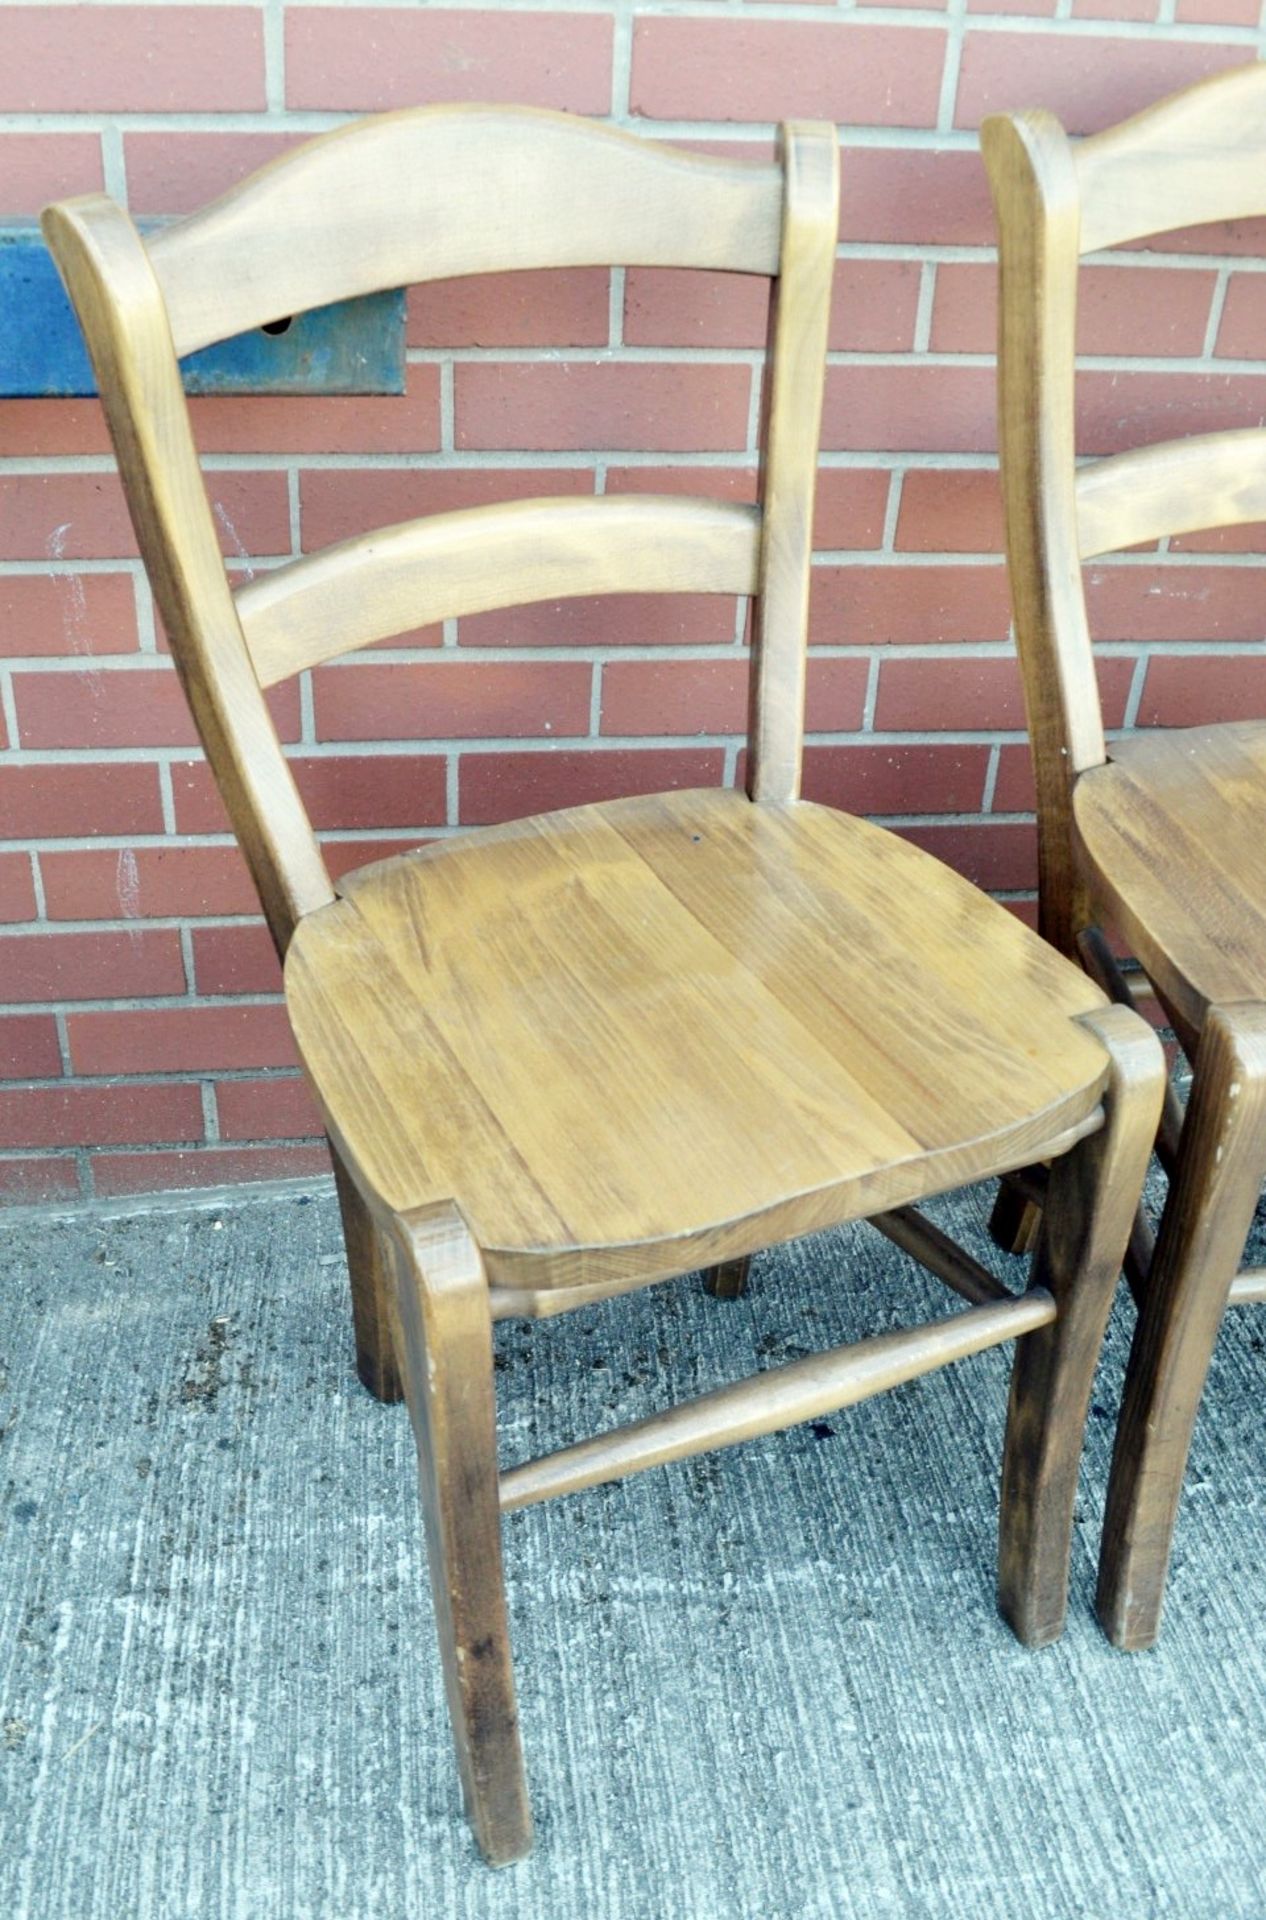 3 x Matching Sturdy Solid Wood Chairs With An Attractive Varnished Finish - Dimensions: H90 x W47 - Image 3 of 6